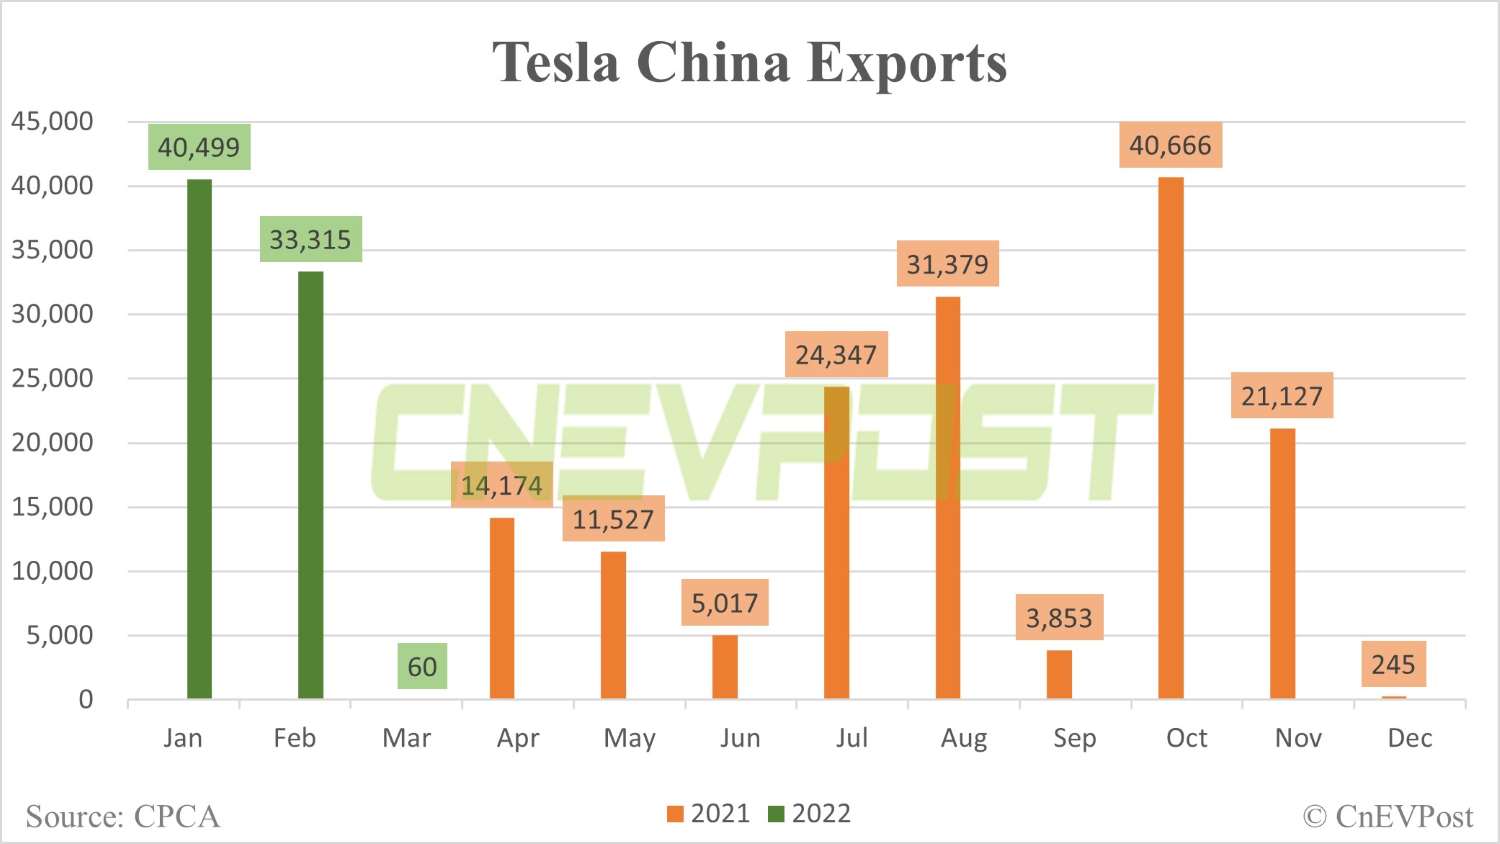 Tesla sells 65,814 China-made vehicles in March, exports only 60 from Shanghai plant-CnEVPost